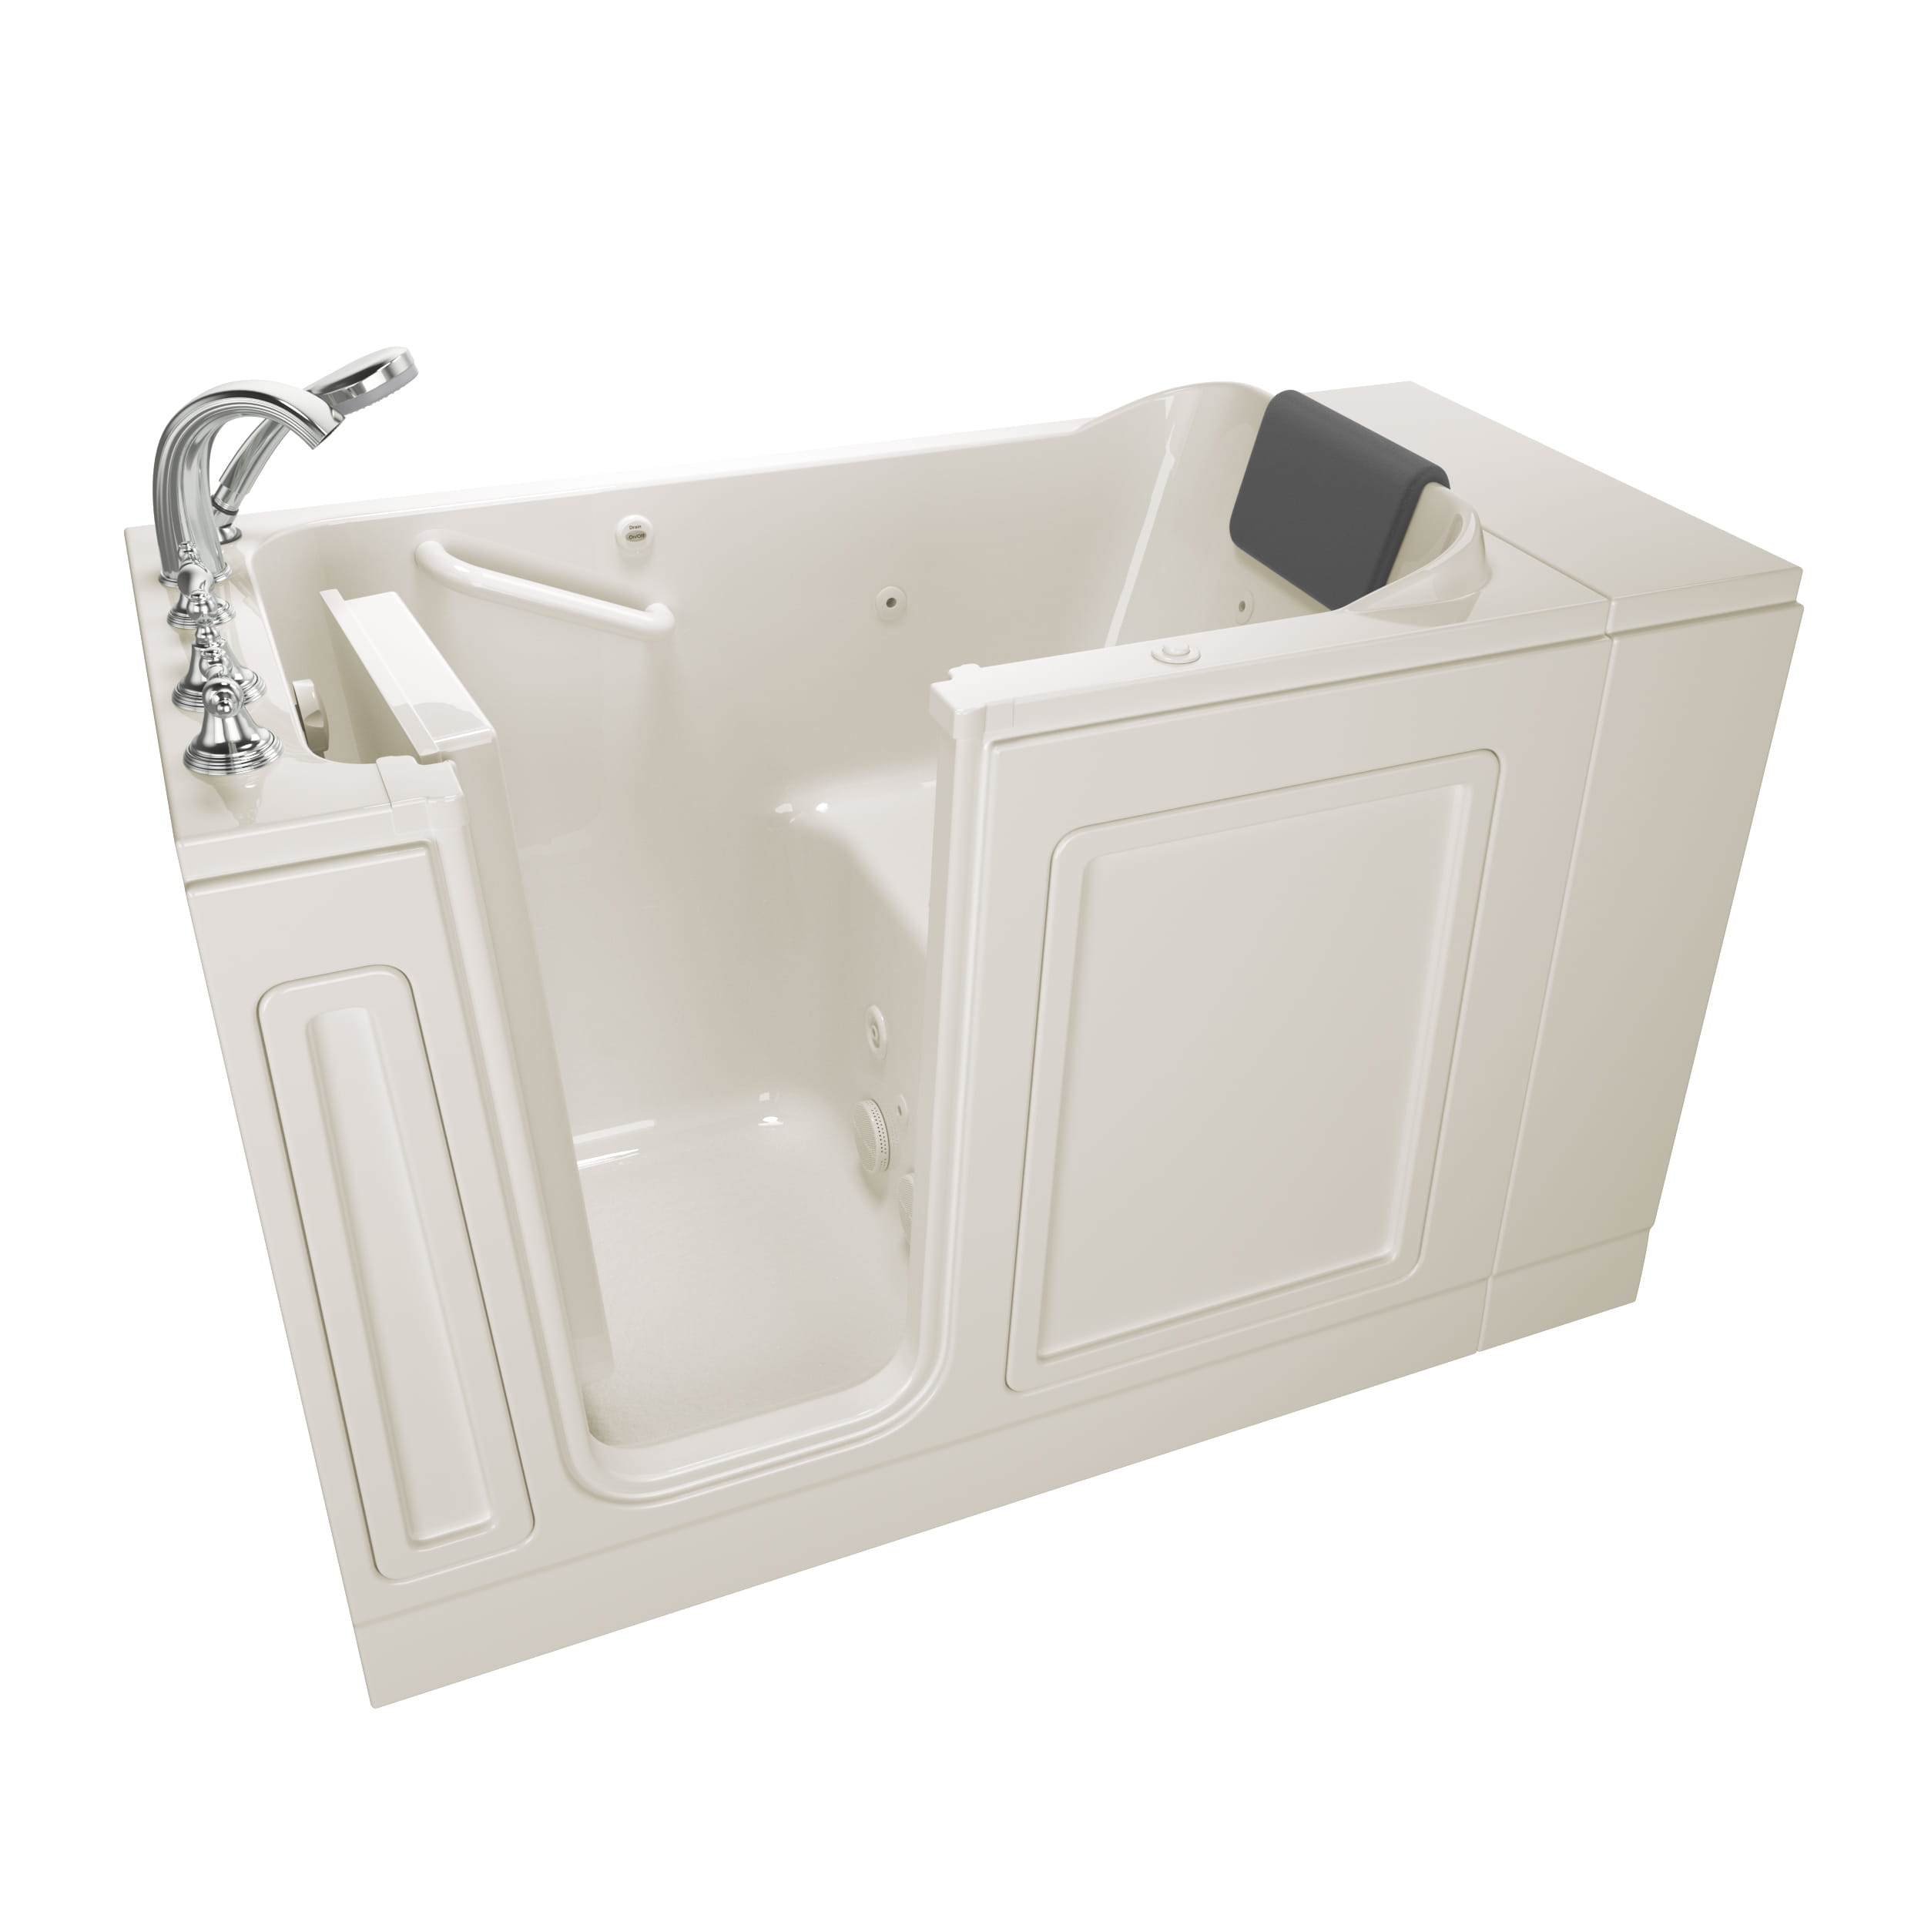 Acrylic Luxury Series 28 x 48 Inch Walk in Tub With Whirlpool System   Left Hand Drain With Faucet WIB LINEN